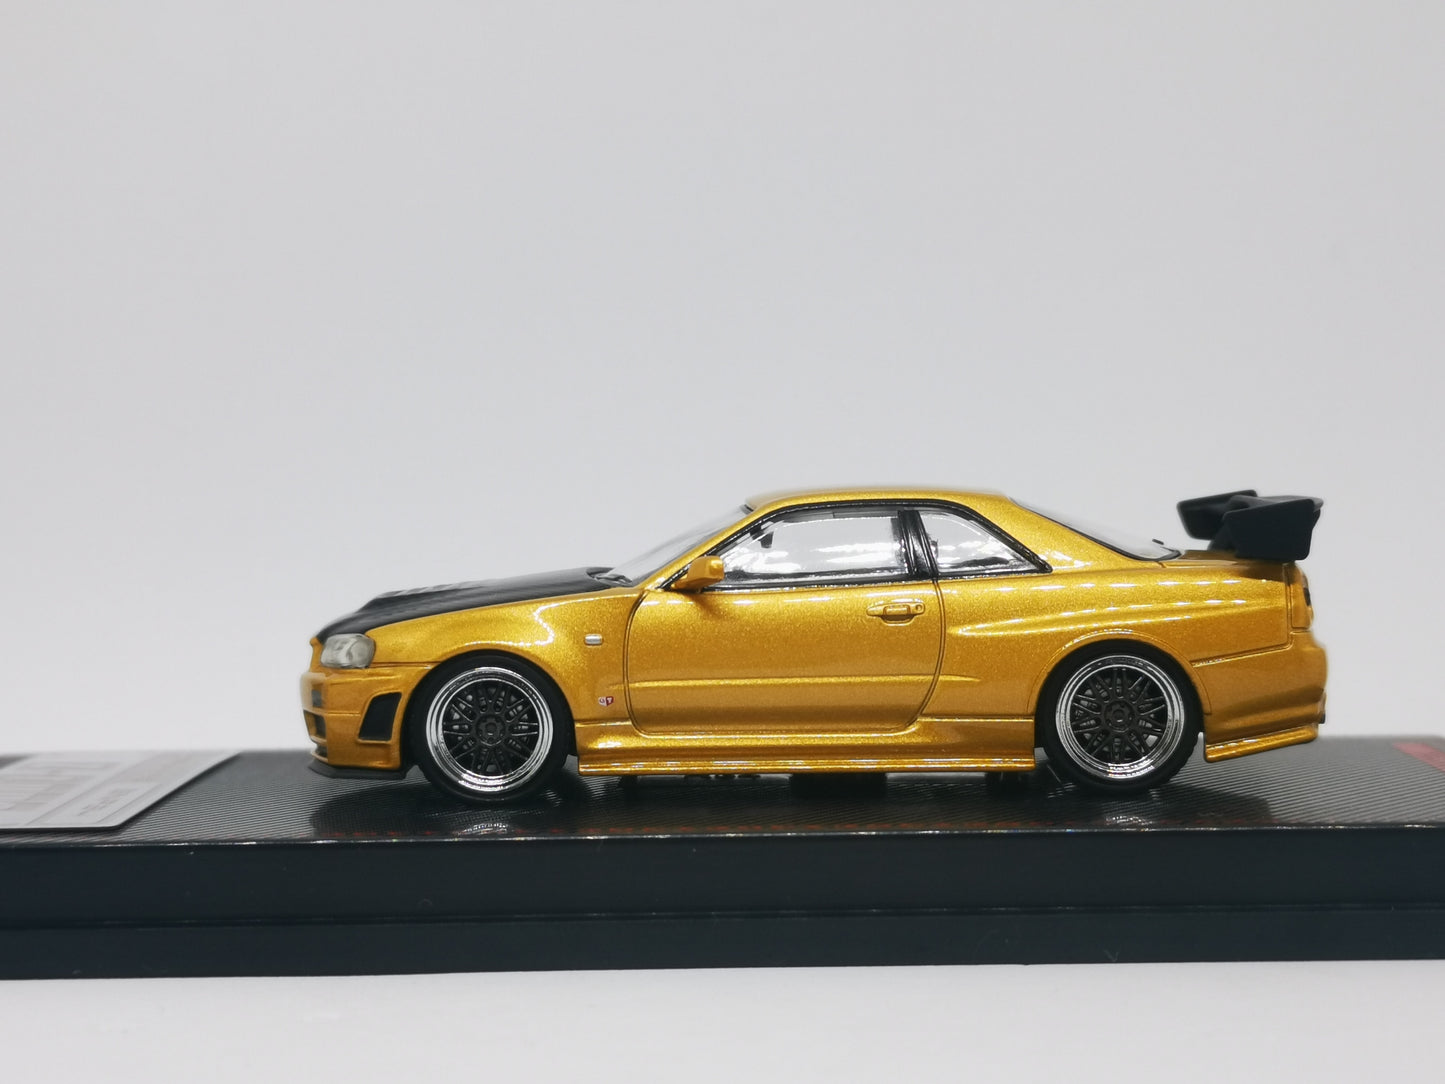 ignition model 1:64 Nissan R34 GT-R Z-tune (Gold)